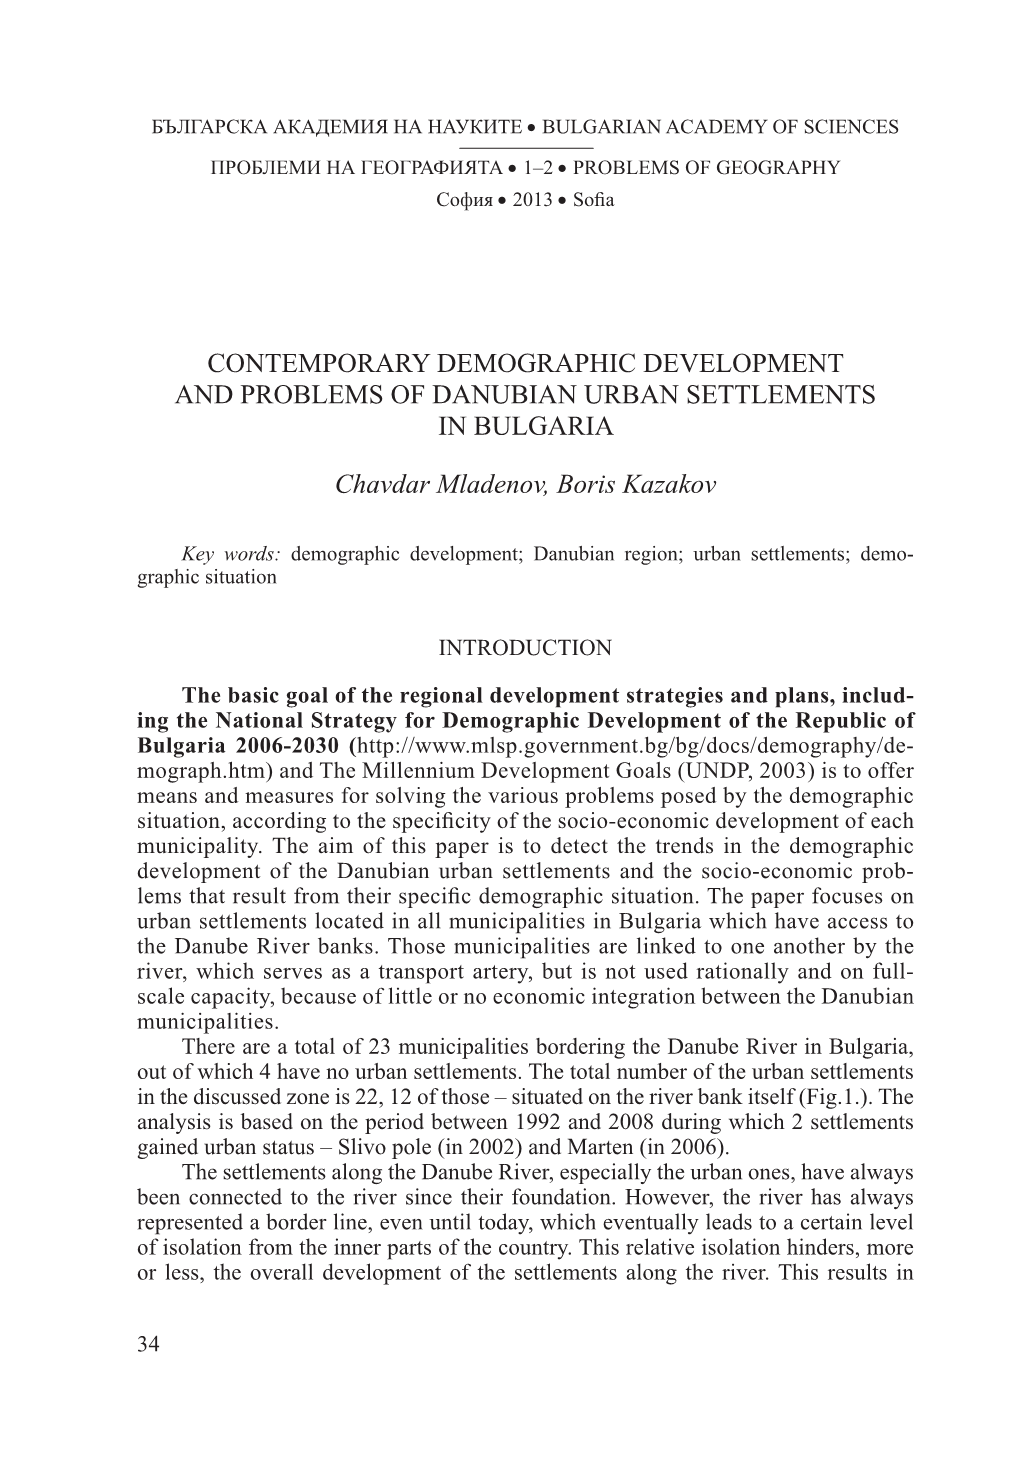 Contemporary Demographic Development and Problems of Danubian Urban Settlements in Bulgaria